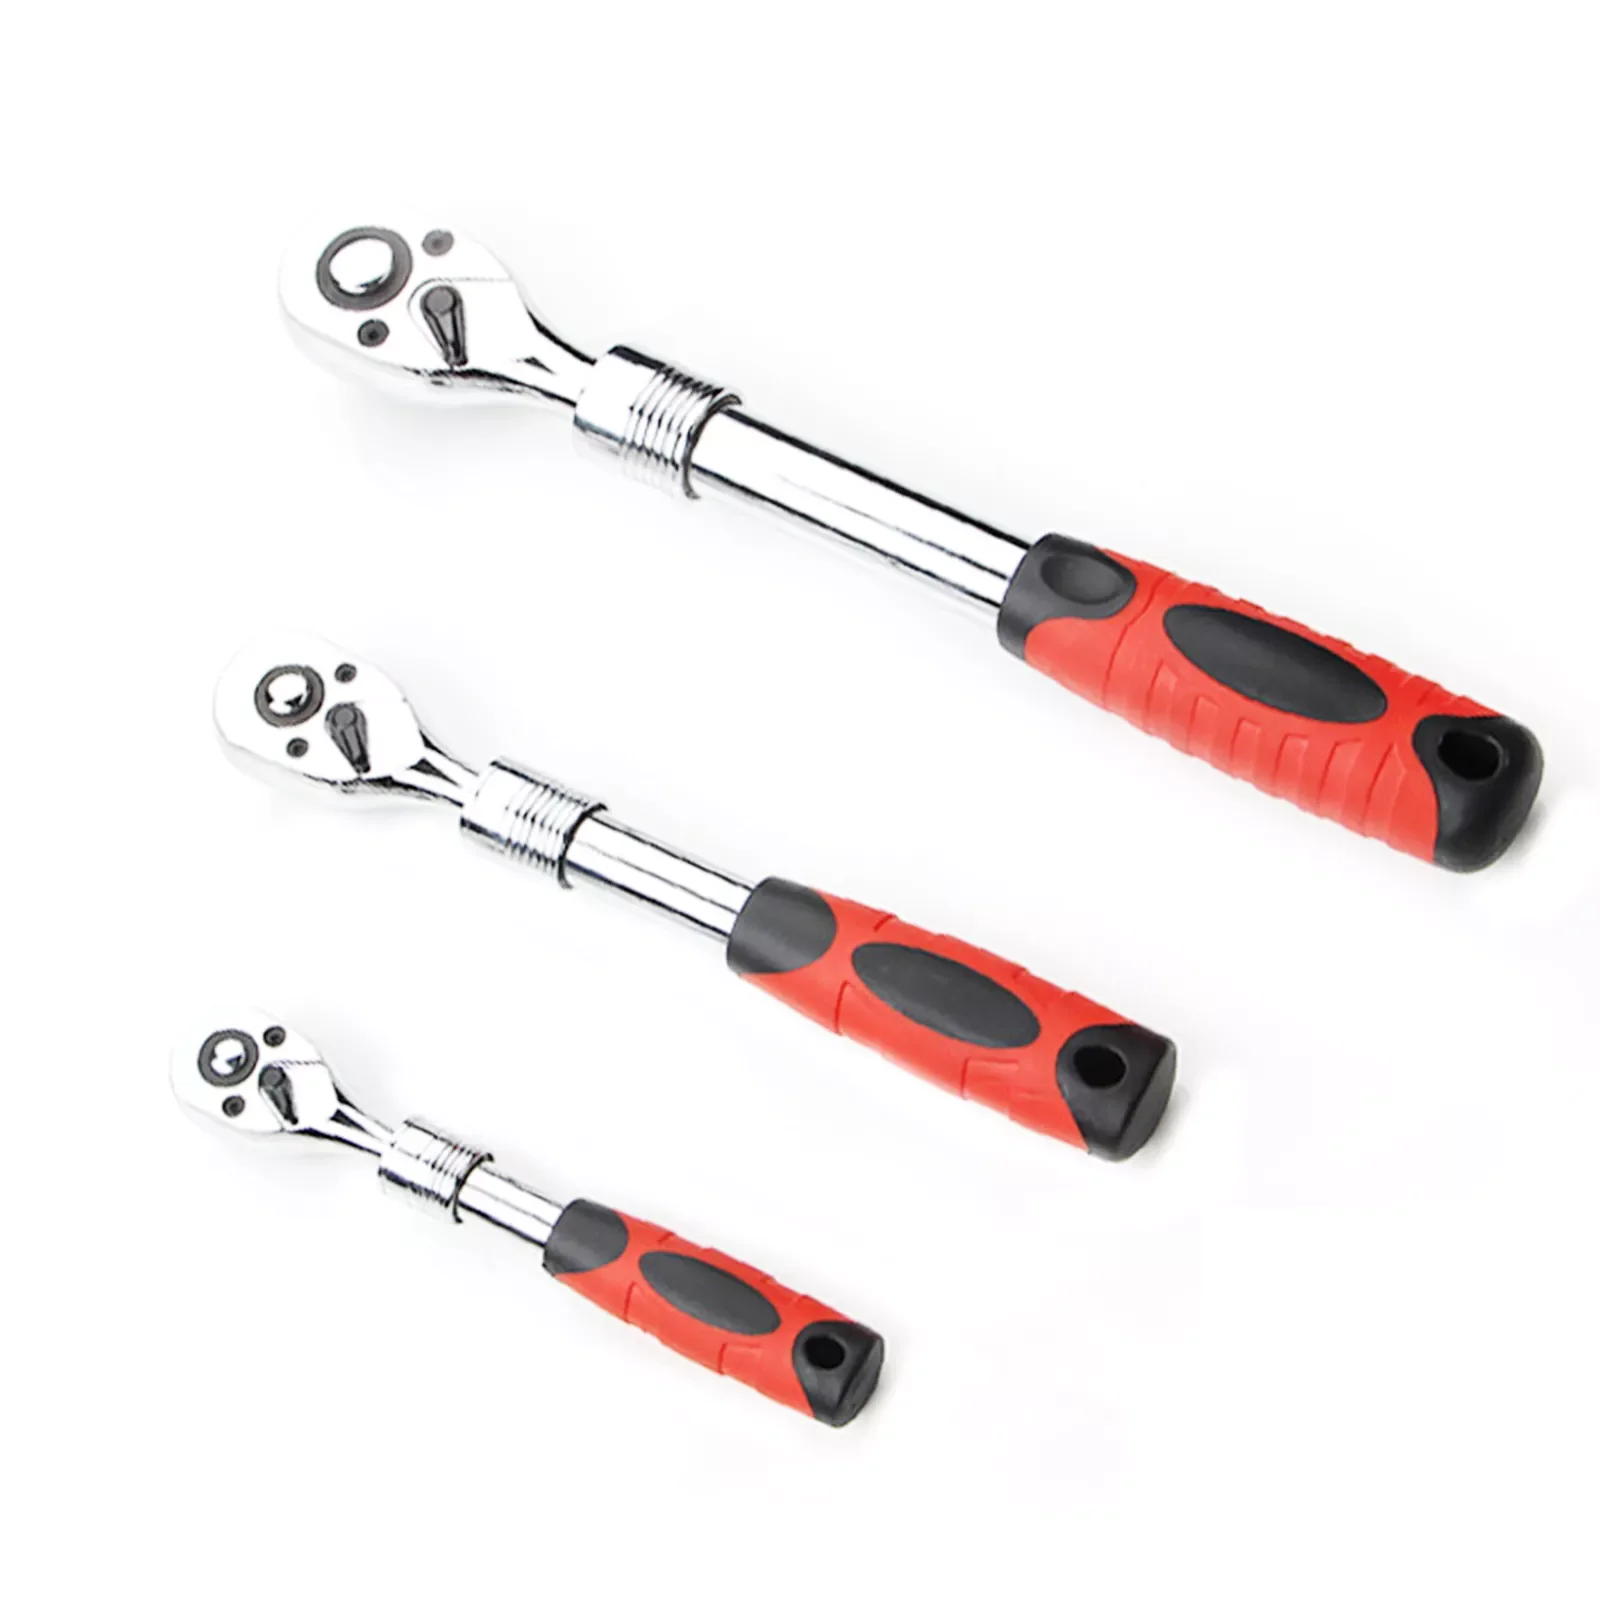 

72 Teeth Extended Telescopic 1/4" 3/8" 1/2" Inch Ratchet Wrench Extended Telescopic Ratchet Socket Wrench Tool